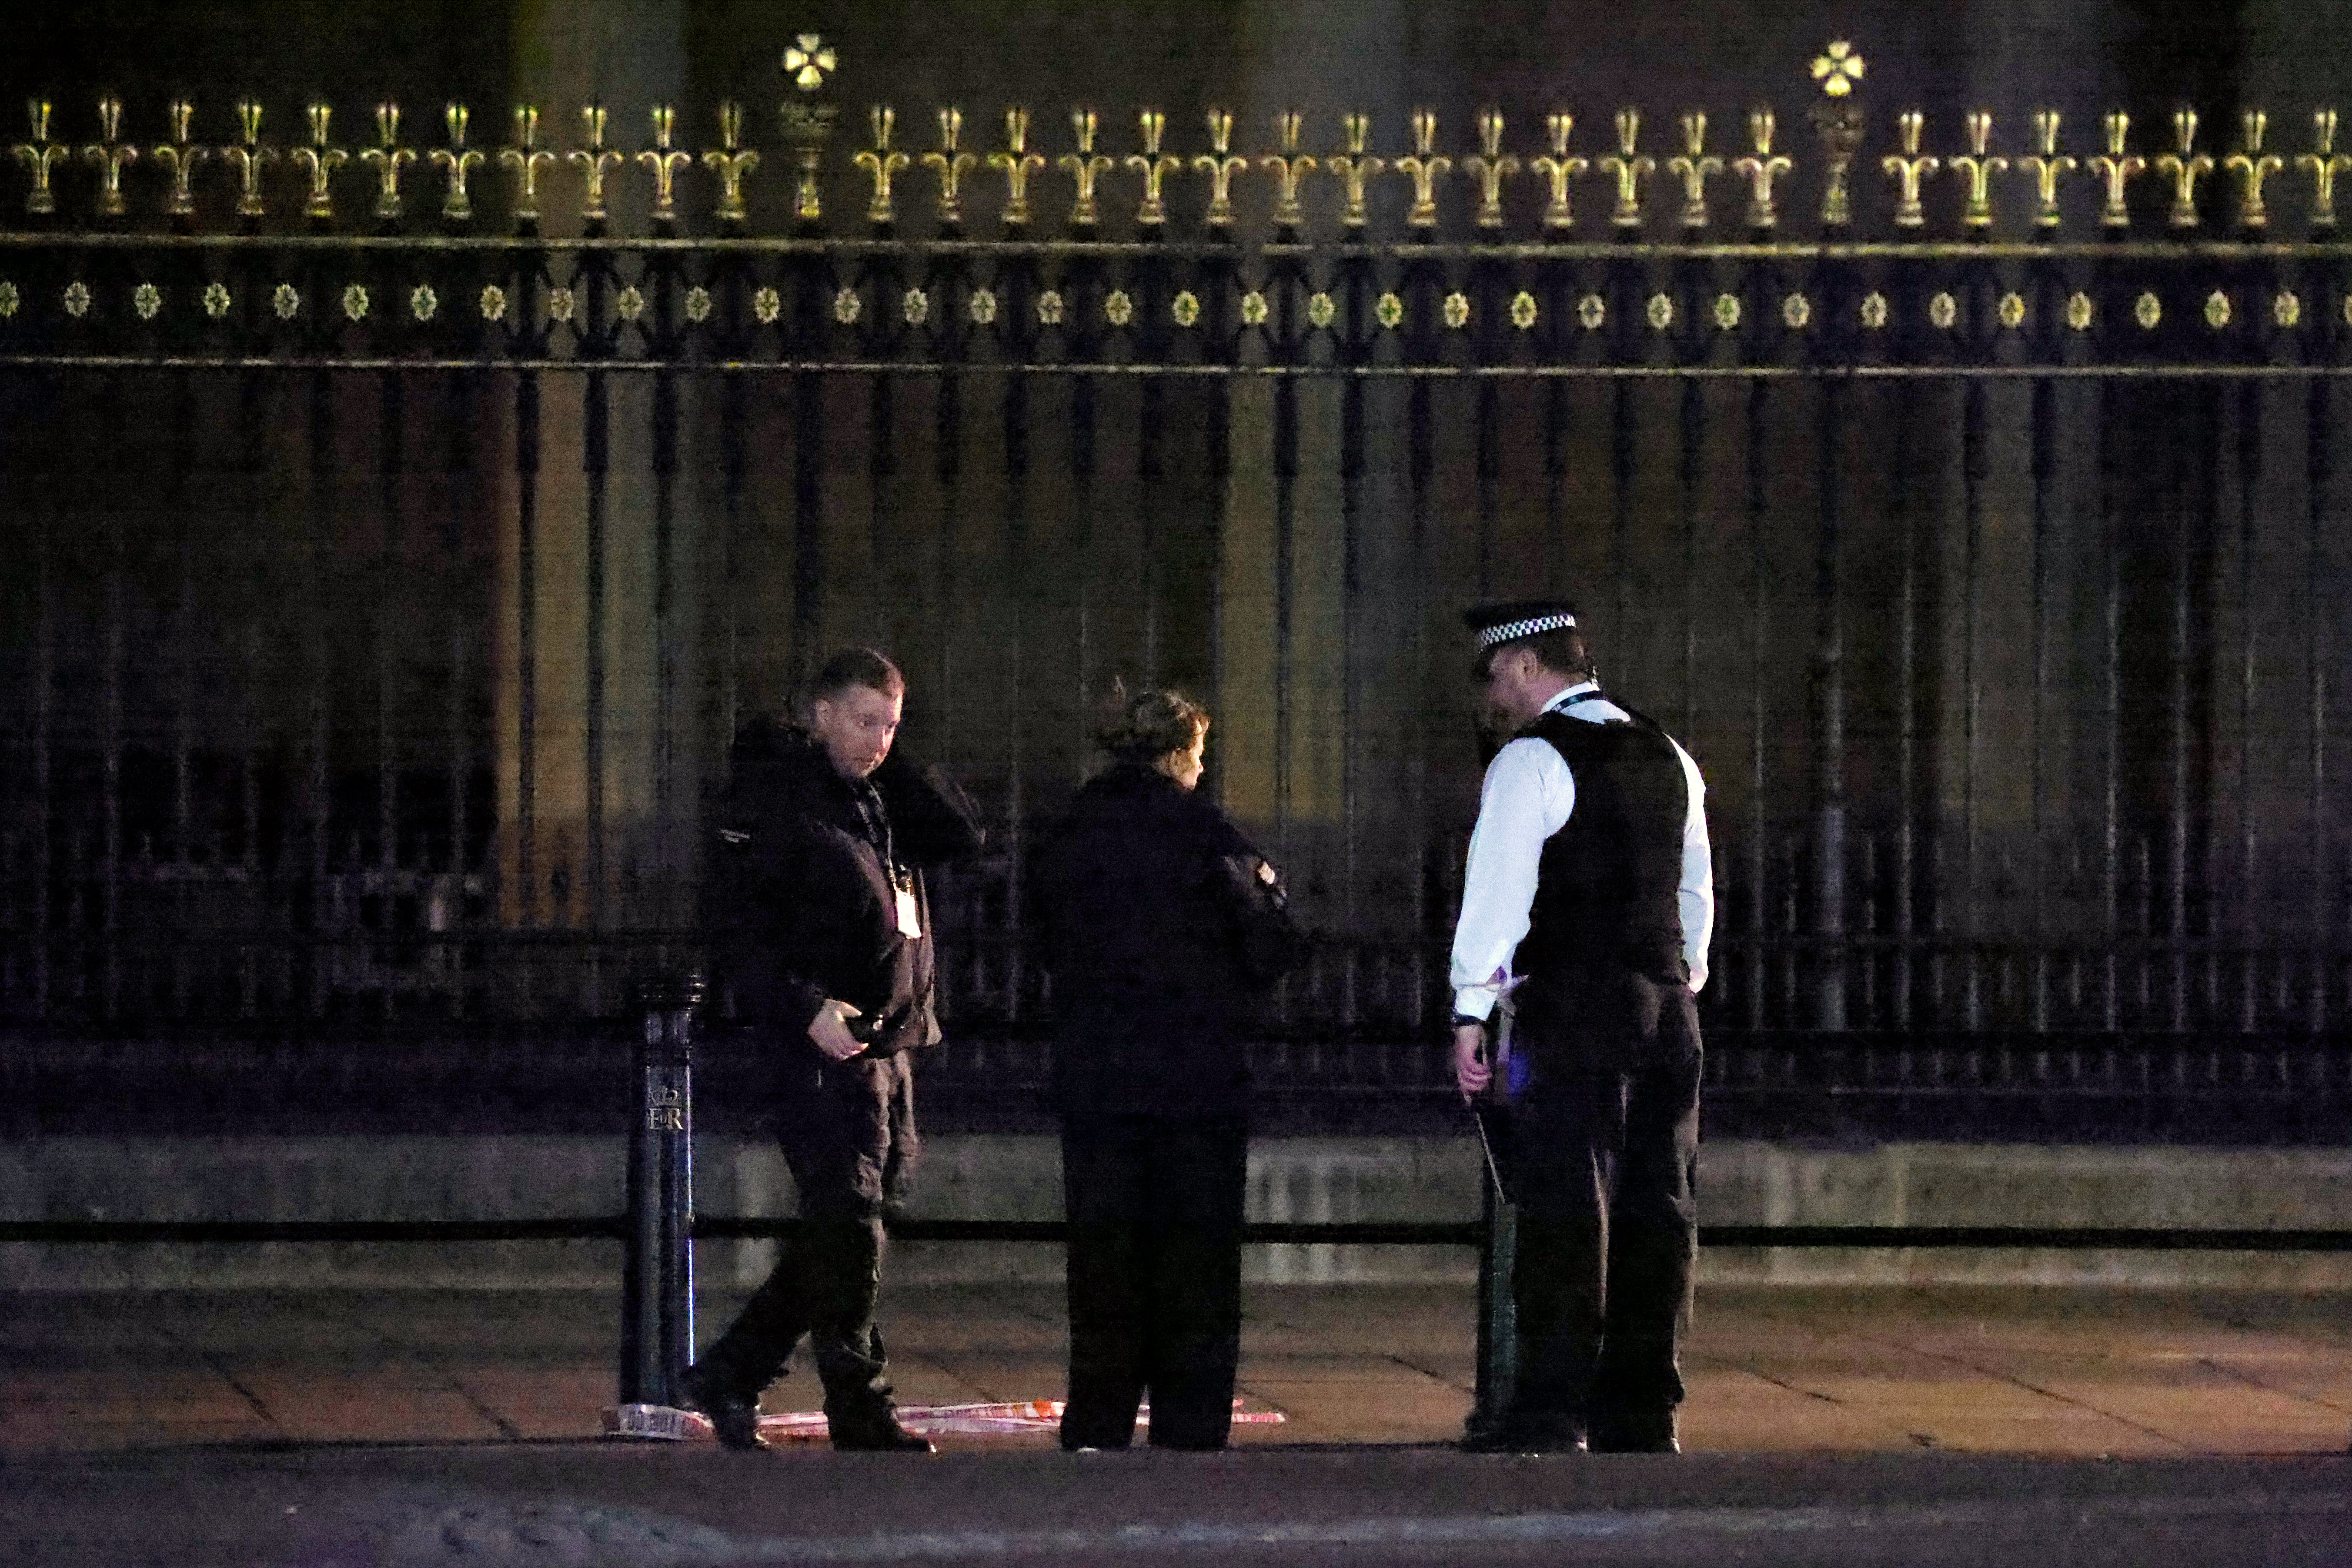 A man was arrested on suspicion of possession of an offensive weapon and a controlled explosion was carried out outside Buckingham Palace